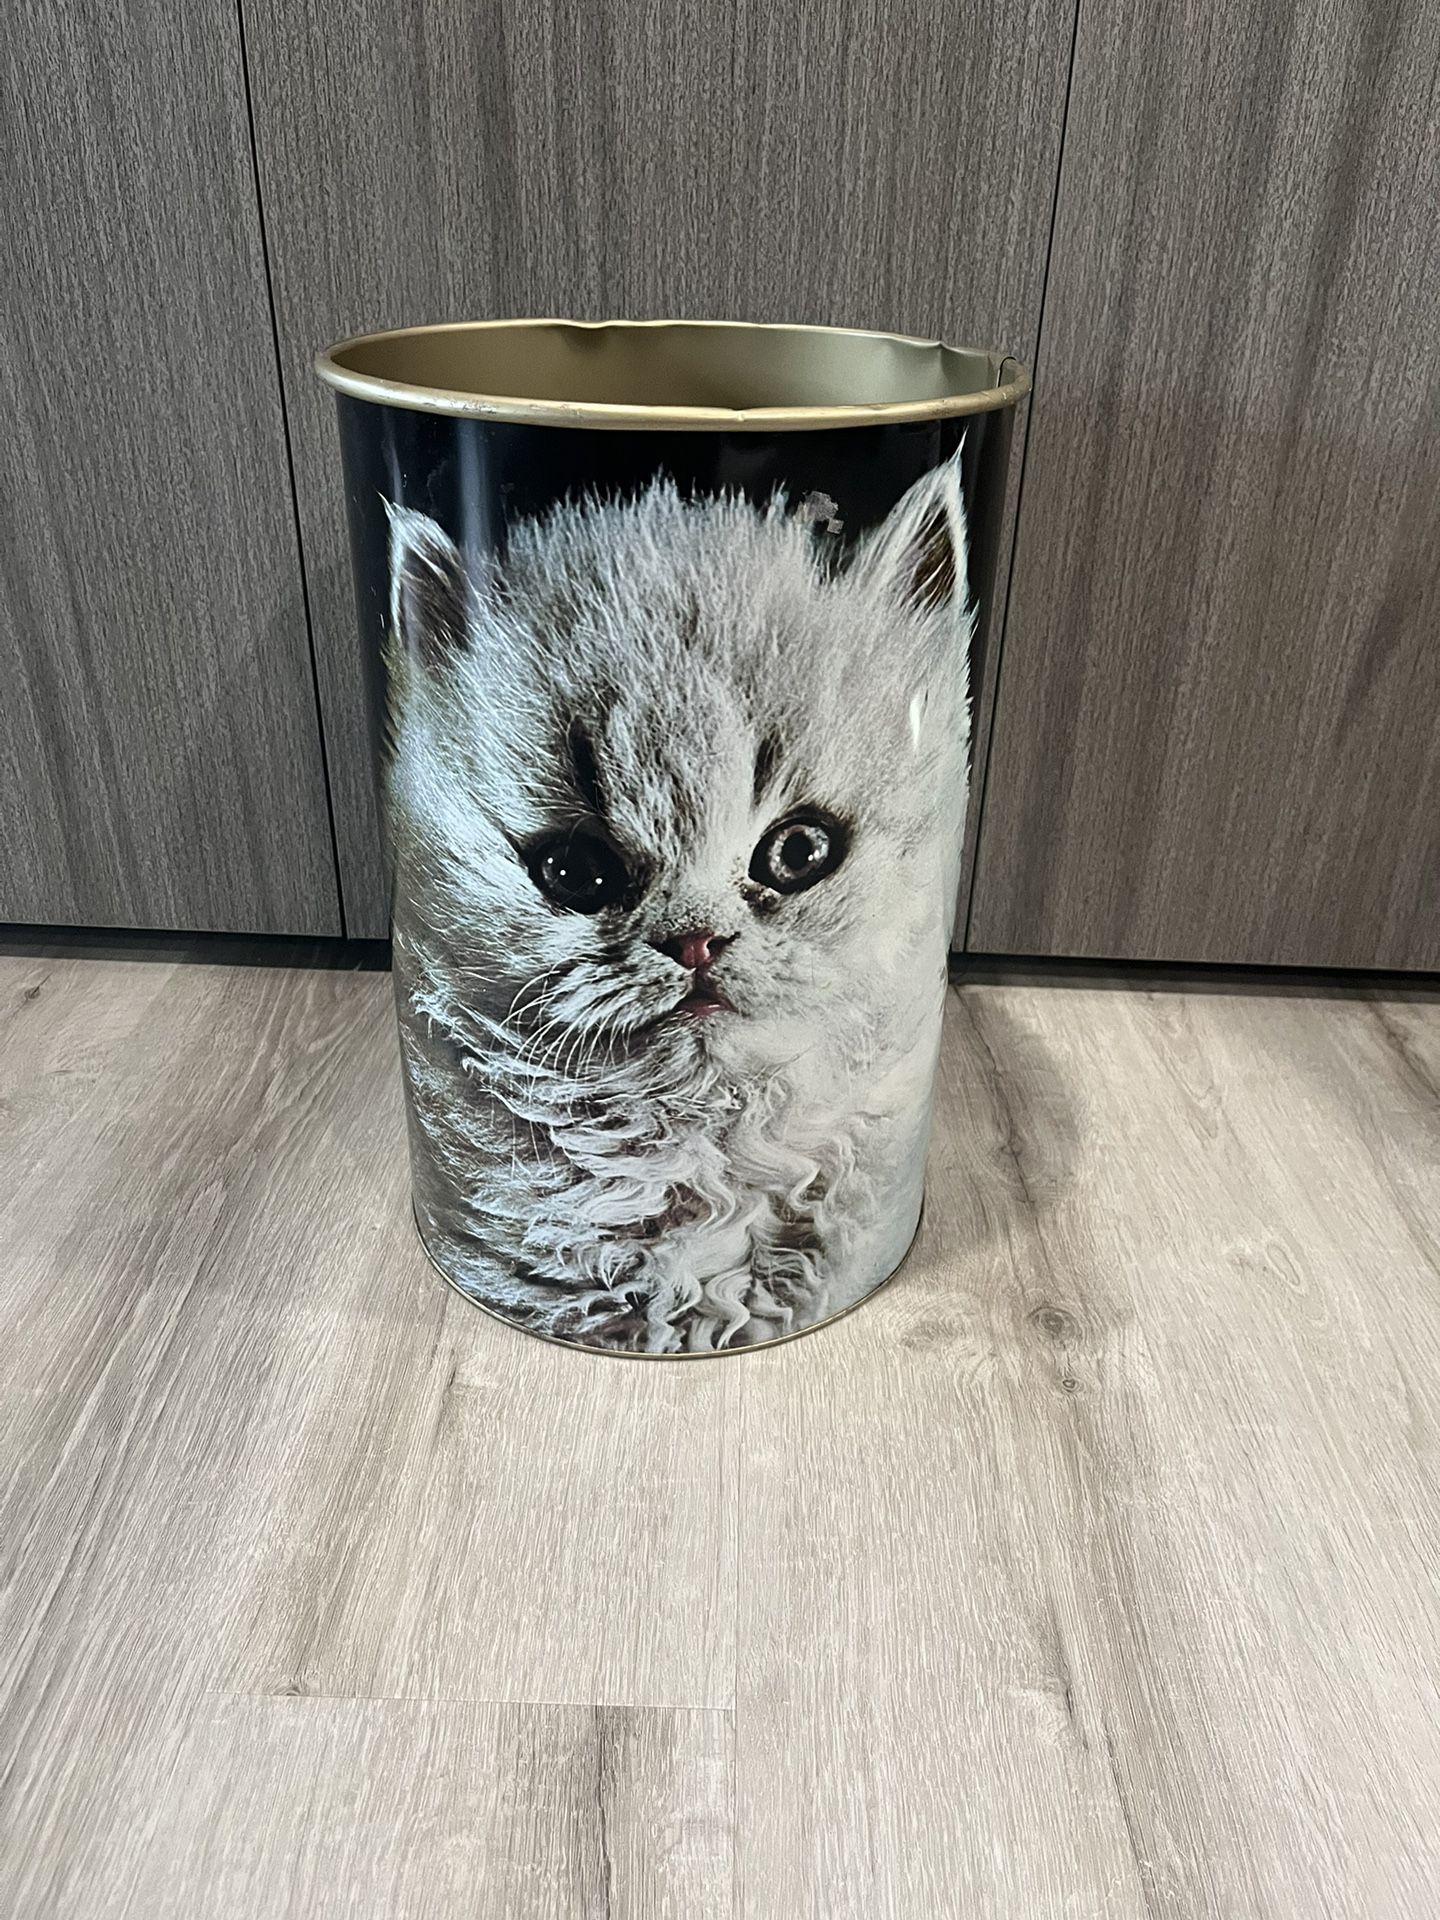 Vintage Tin Trash Can, Double Sided Cat Print